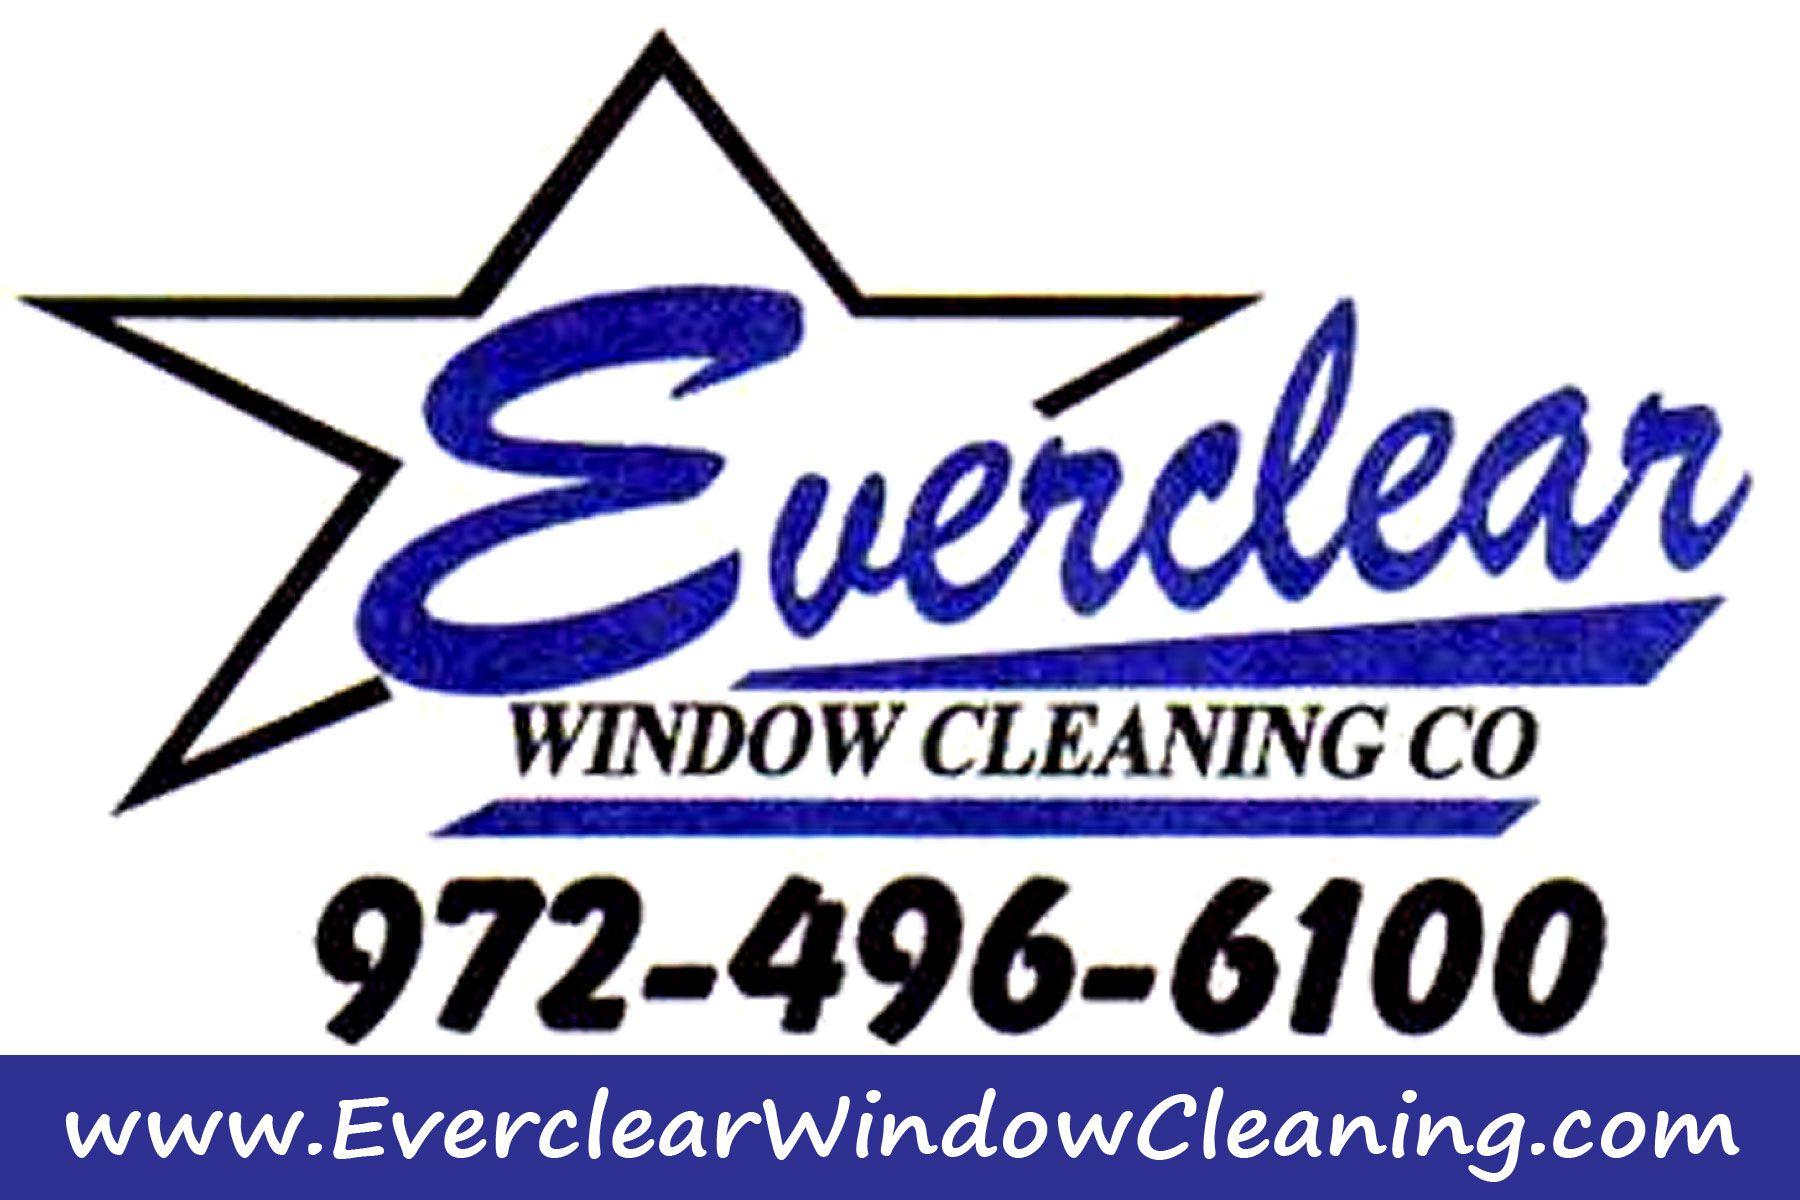 Everclear Logo - Home Page